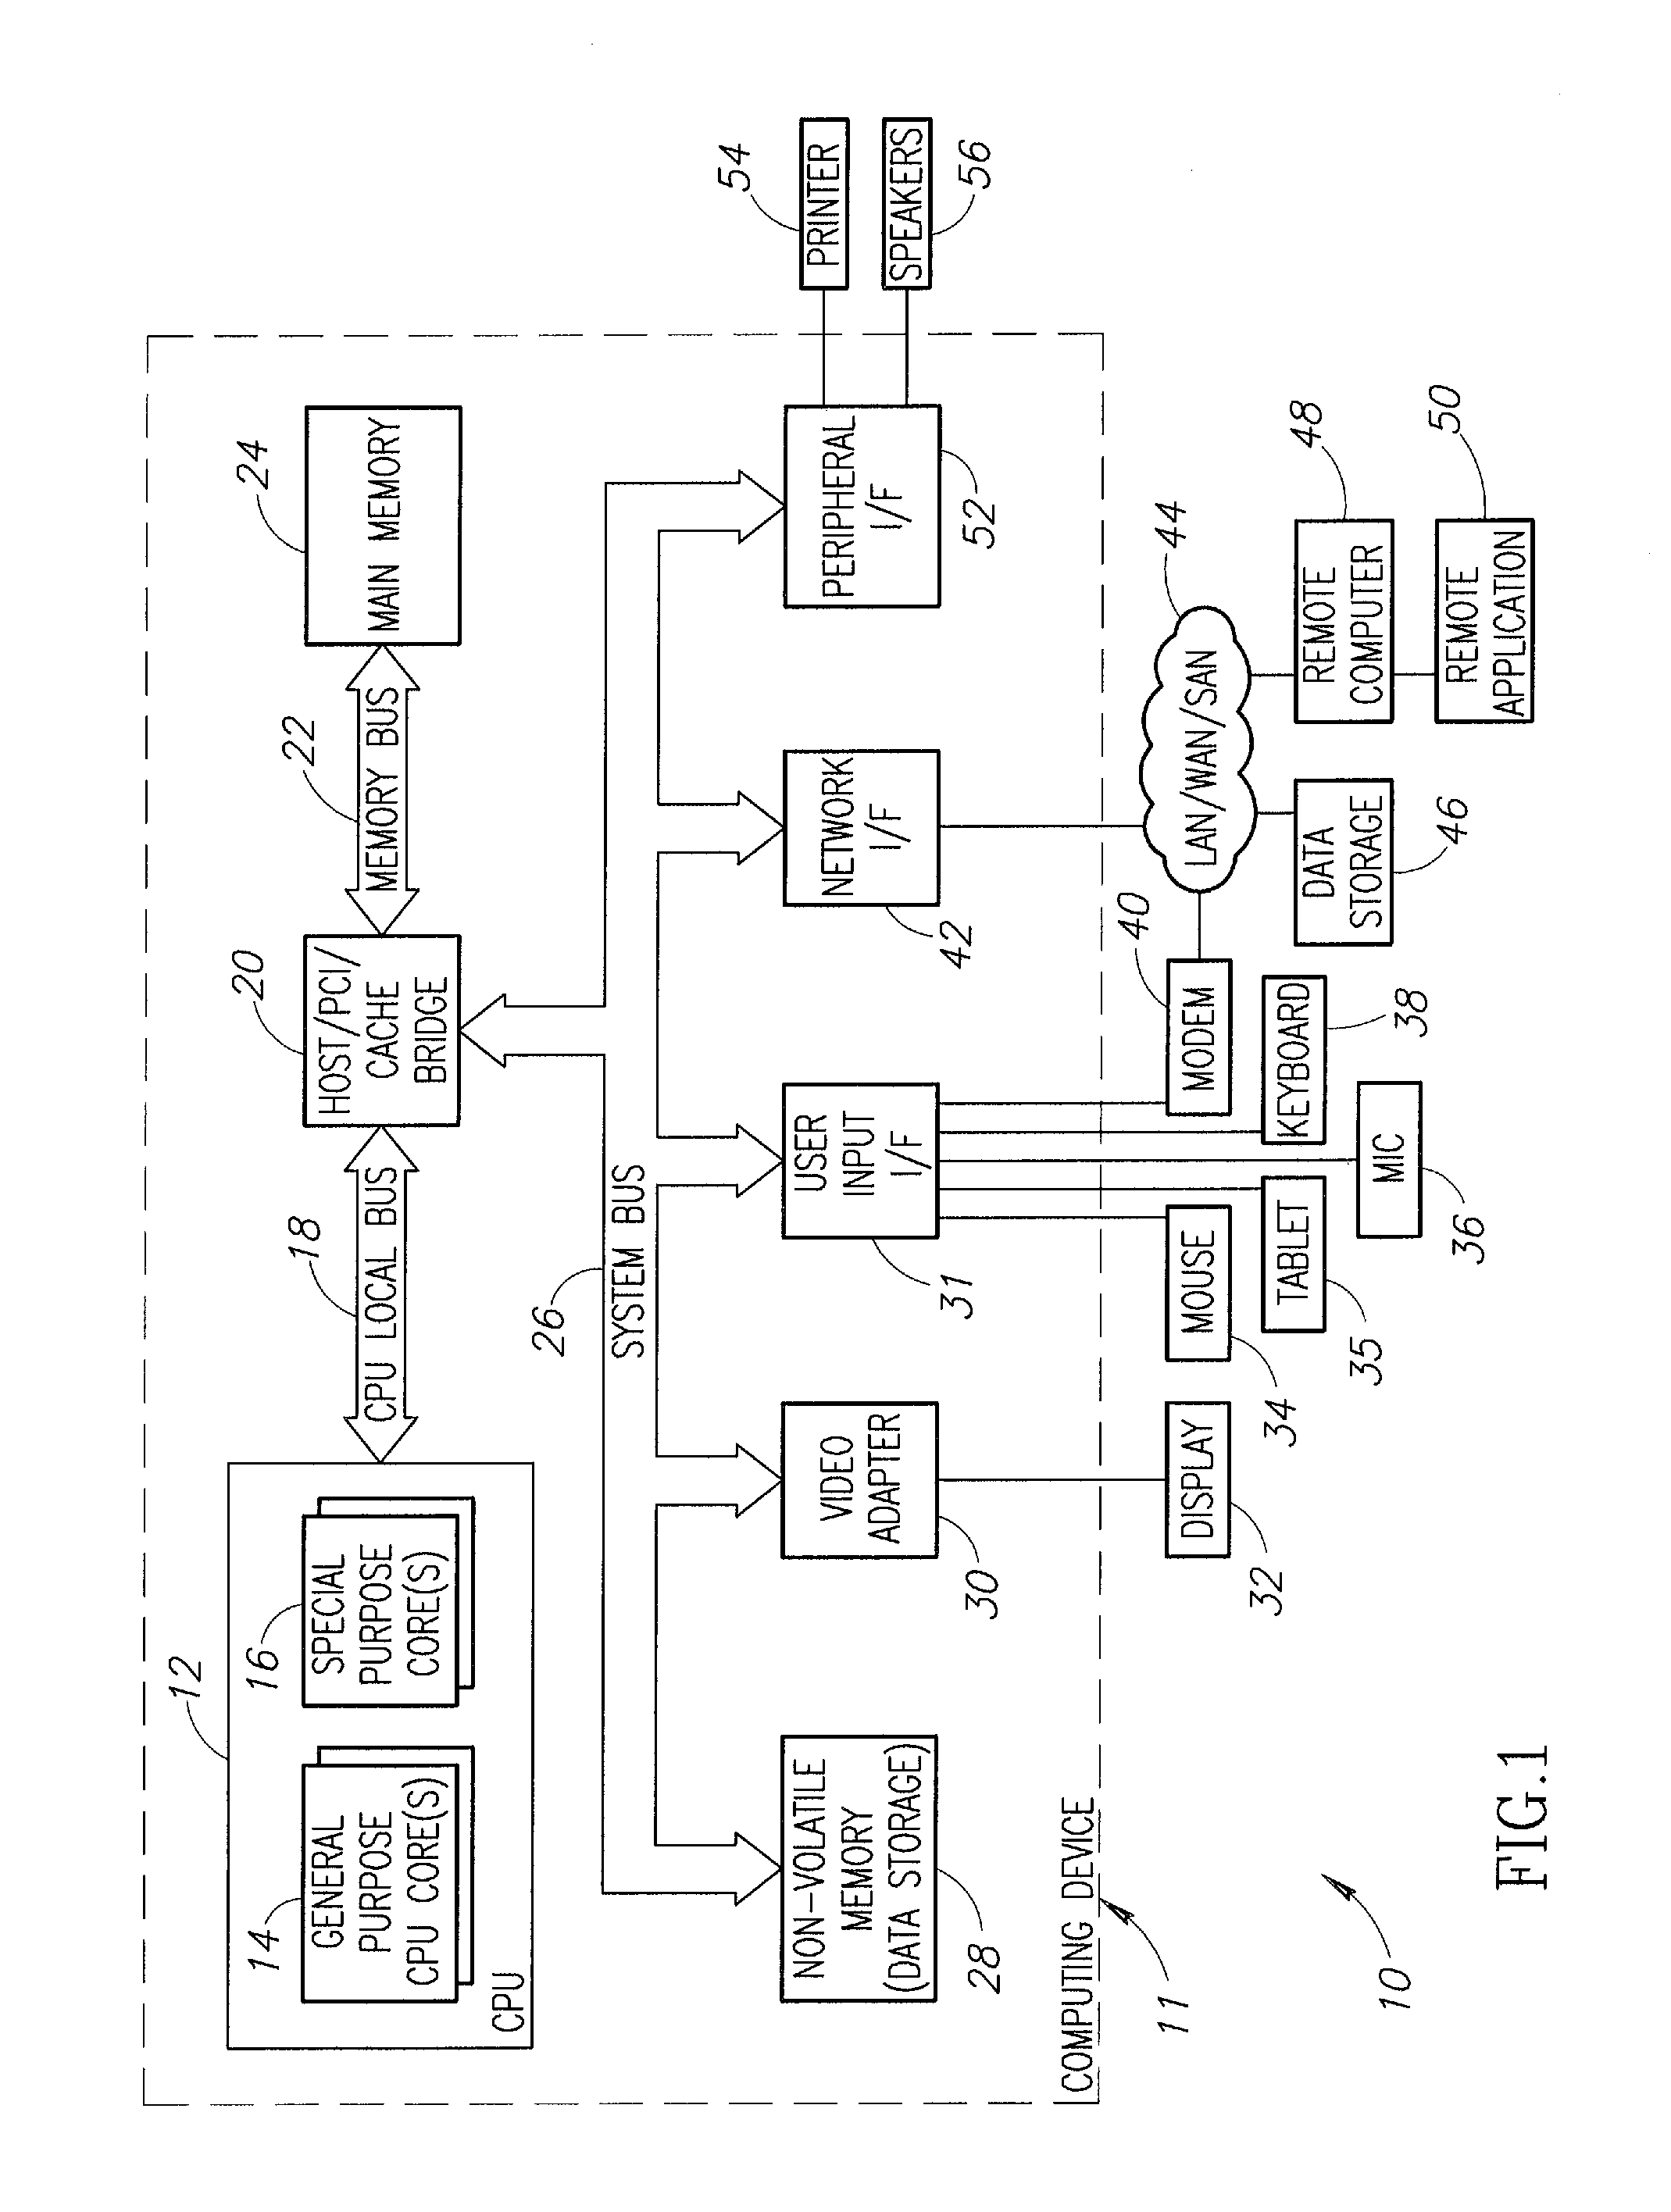 System and Method of Browsing Electronic Catalogs from Multiple Merchants